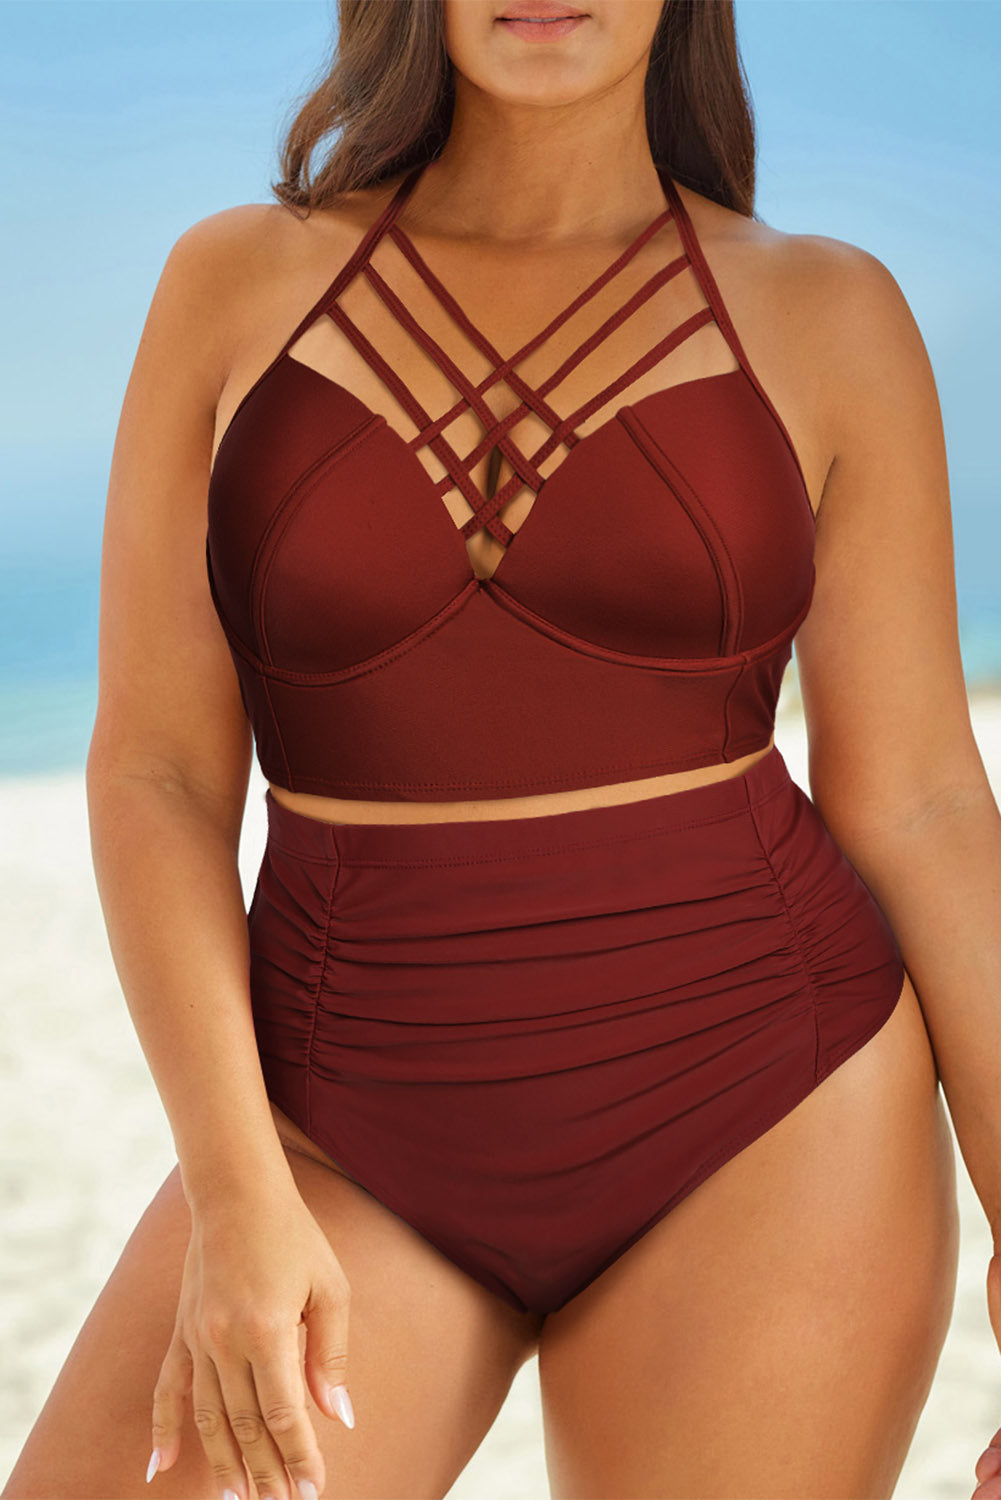 Chic Full Size Halter Swimsuit with crisscross top & ruched bottom for a flattering fit. Available in brick red & black - perfect for beach days!